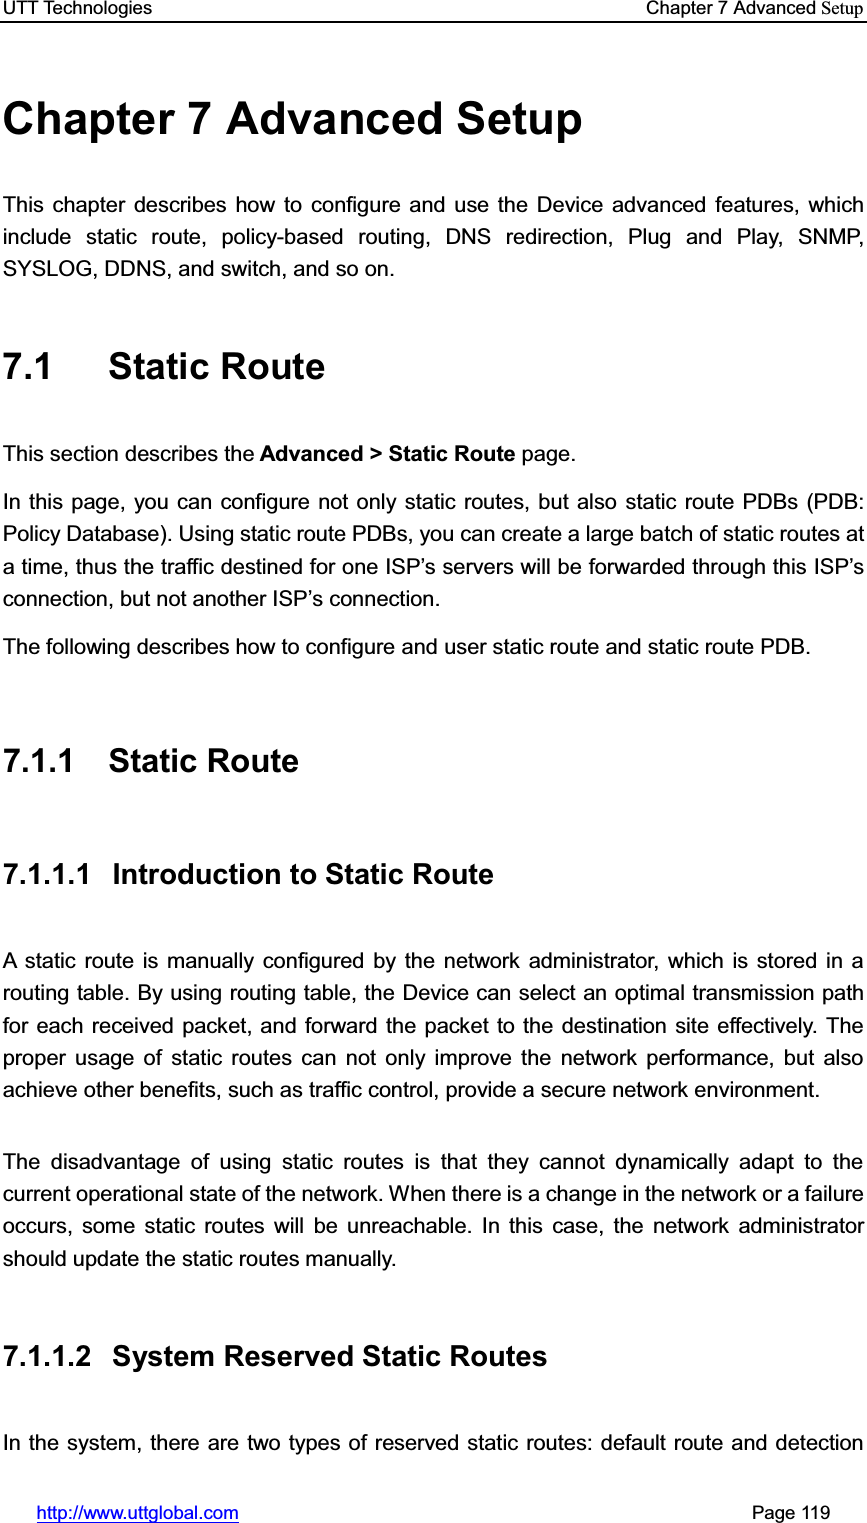 UTT Technologies    Chapter 7 Advanced Setuphttp://www.uttglobal.com                                                       Page 119 Chapter 7 Advanced Setup This chapter describes how to configure and use the Device advanced features, which include static route, policy-based routing, DNS redirection, Plug and Play, SNMP, SYSLOG, DDNS, and switch, and so on. 7.1 Static Route This section describes the Advanced &gt; Static Route page. In this page, you can configure not only static routes, but also static route PDBs (PDB: Policy Database). Using static route PDBs, you can create a large batch of static routes at a time, thus the traffic destined for one ISP¶s servers will be forwarded through this ISP¶sconnection, but not another ISP¶s connection. The following describes how to configure and user static route and static route PDB. 7.1.1 Static Route 7.1.1.1  Introduction to Static Route A static route is manually configured by the network administrator, which is stored in a routing table. By using routing table, the Device can select an optimal transmission path for each received packet, and forward the packet to the destination site effectively. The proper usage of static routes can not only improve the network performance, but also achieve other benefits, such as traffic control, provide a secure network environment. The disadvantage of using static routes is that they cannot dynamically adapt to the current operational state of the network. When there is a change in the network or a failure occurs, some static routes will be unreachable. In this case, the network administrator should update the static routes manually.   7.1.1.2 System Reserved Static Routes In the system, there are two types of reserved static routes: default route and detection 